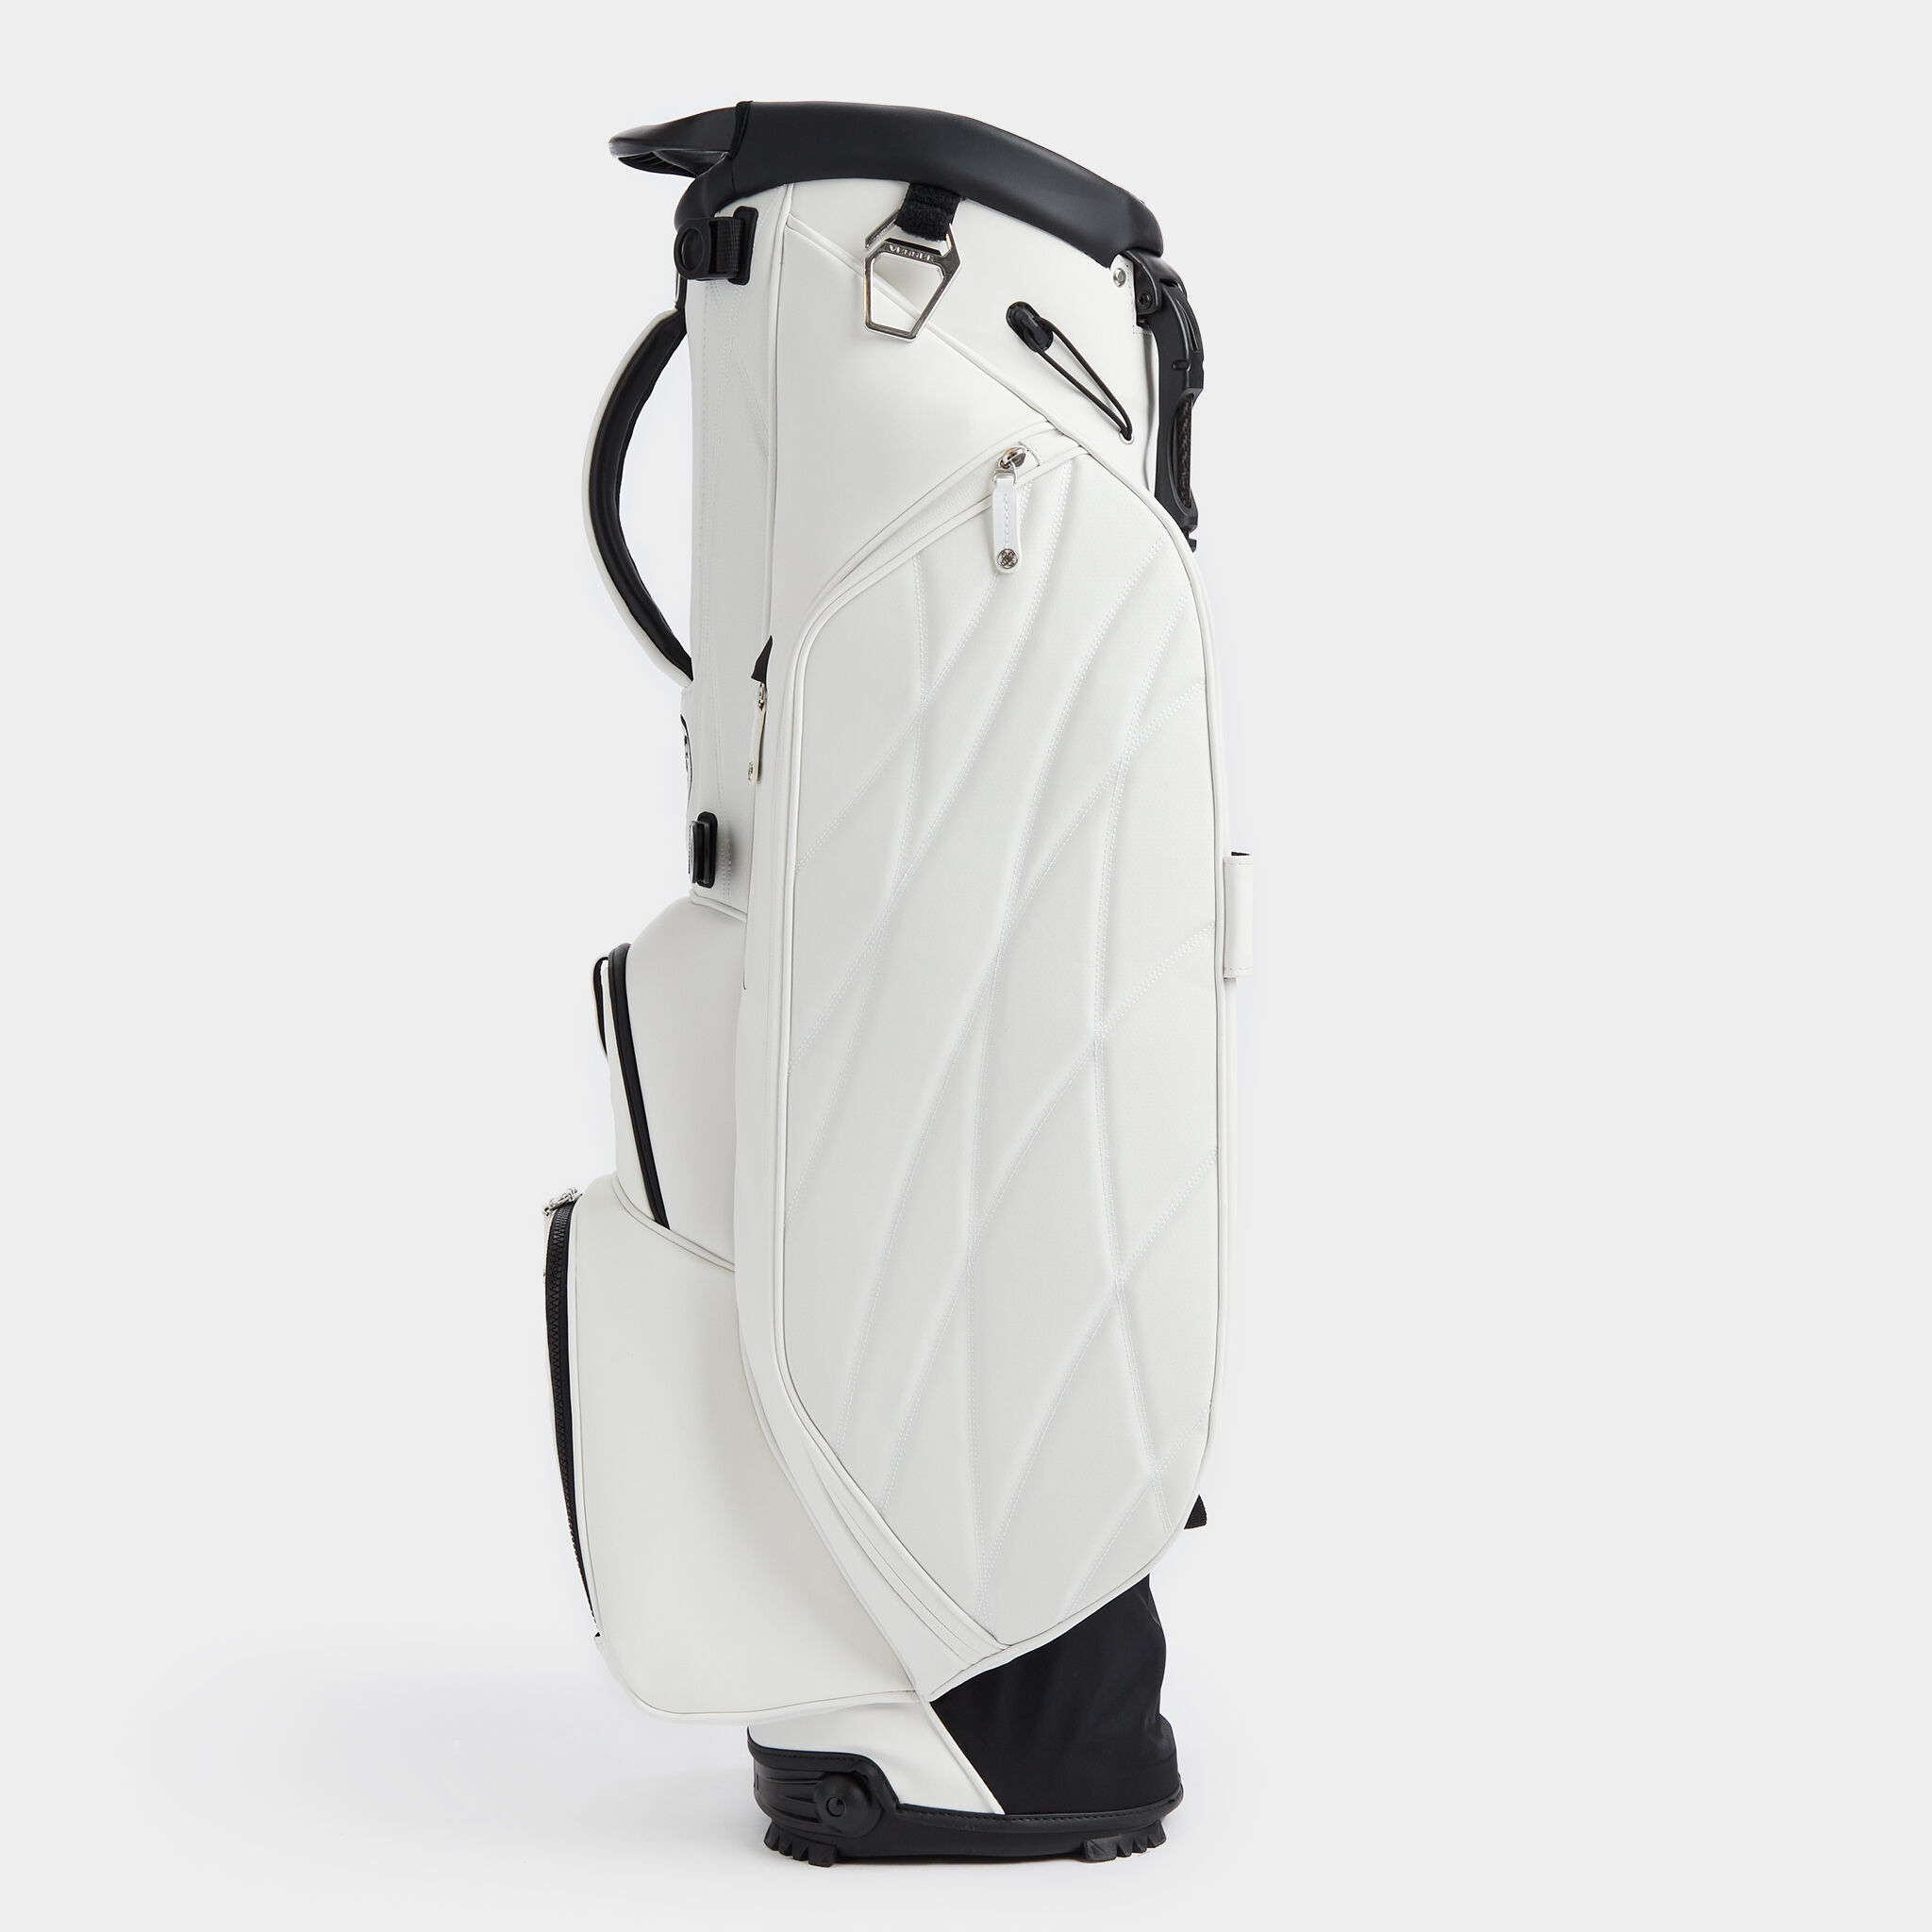 TRANSPORTER TOUR CARRY GOLF BAG   GOLF BAGS FOR MEN AND WOMEN   G/FORE